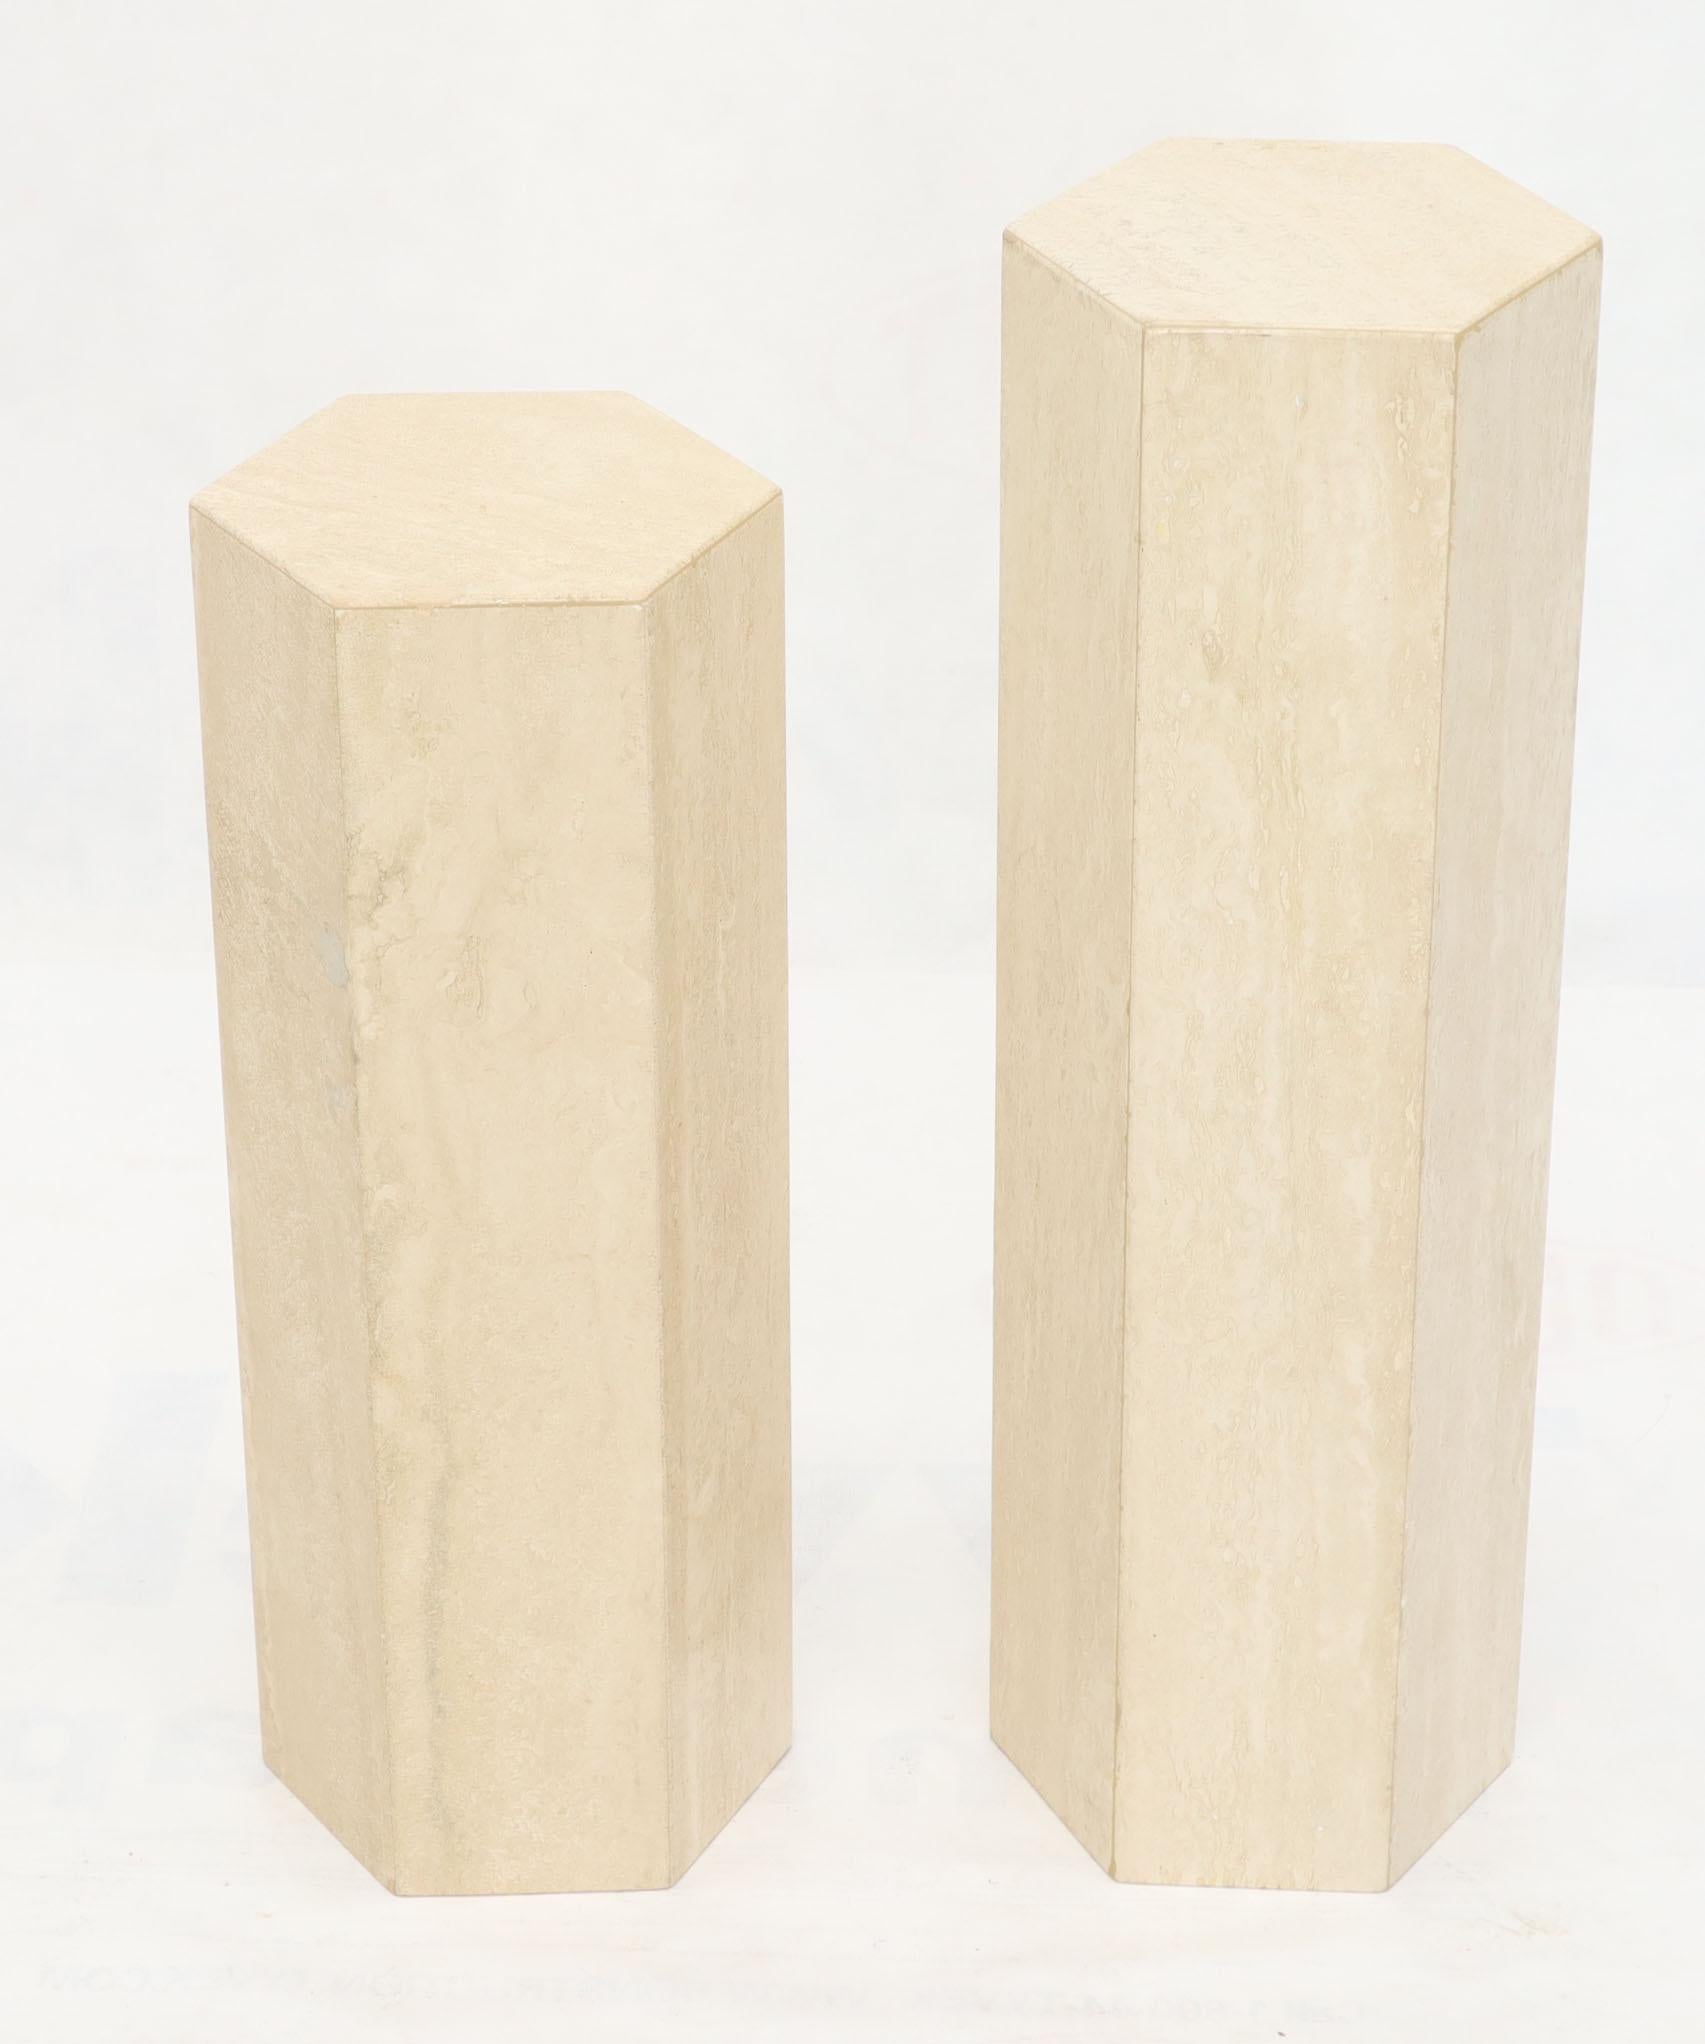 American Mid-Century Modern Travertine Marble Tall Tower Shape Table Pedestal For Sale